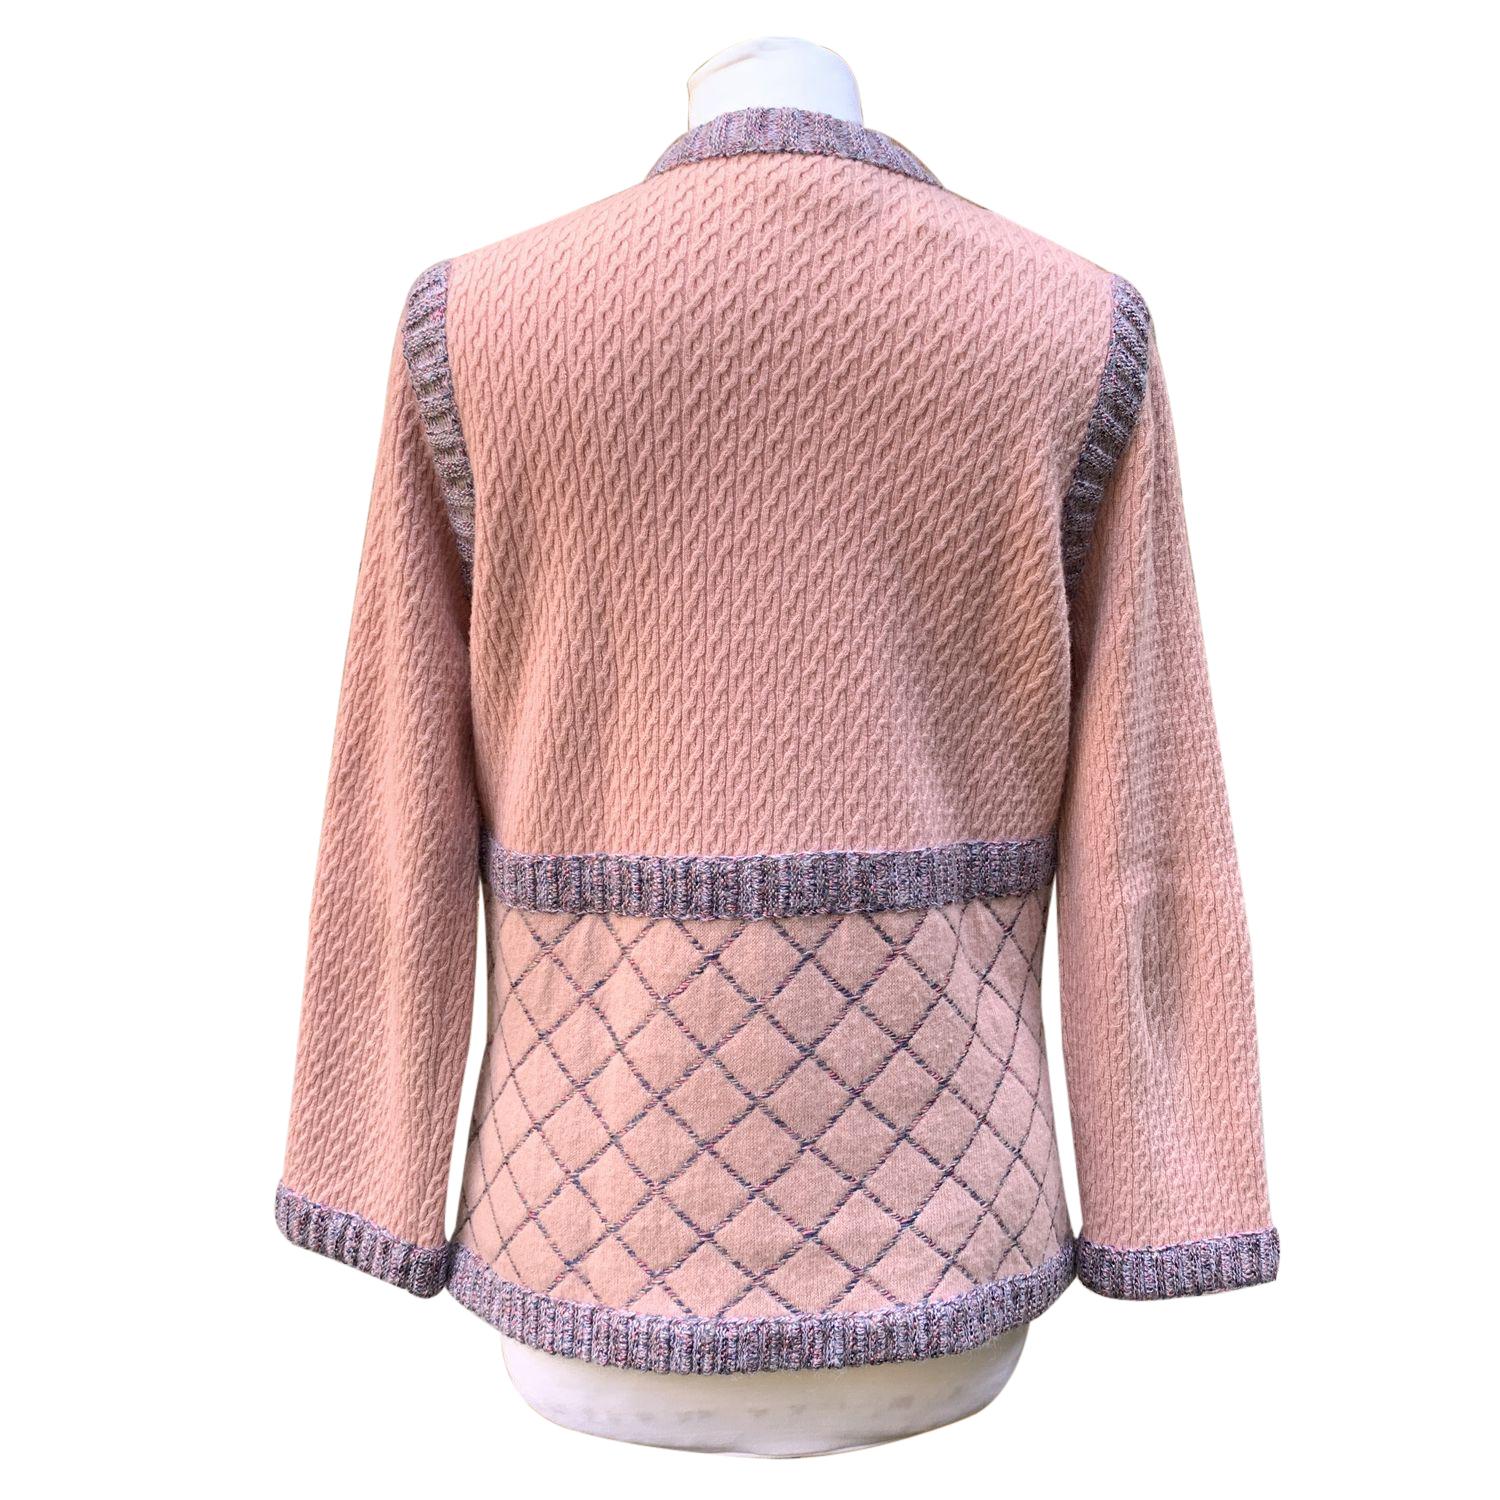 Chanel 2015 Pink Silk and Cashmere Knit Cardigan Size 40 FR In Excellent Condition For Sale In Rome, Rome